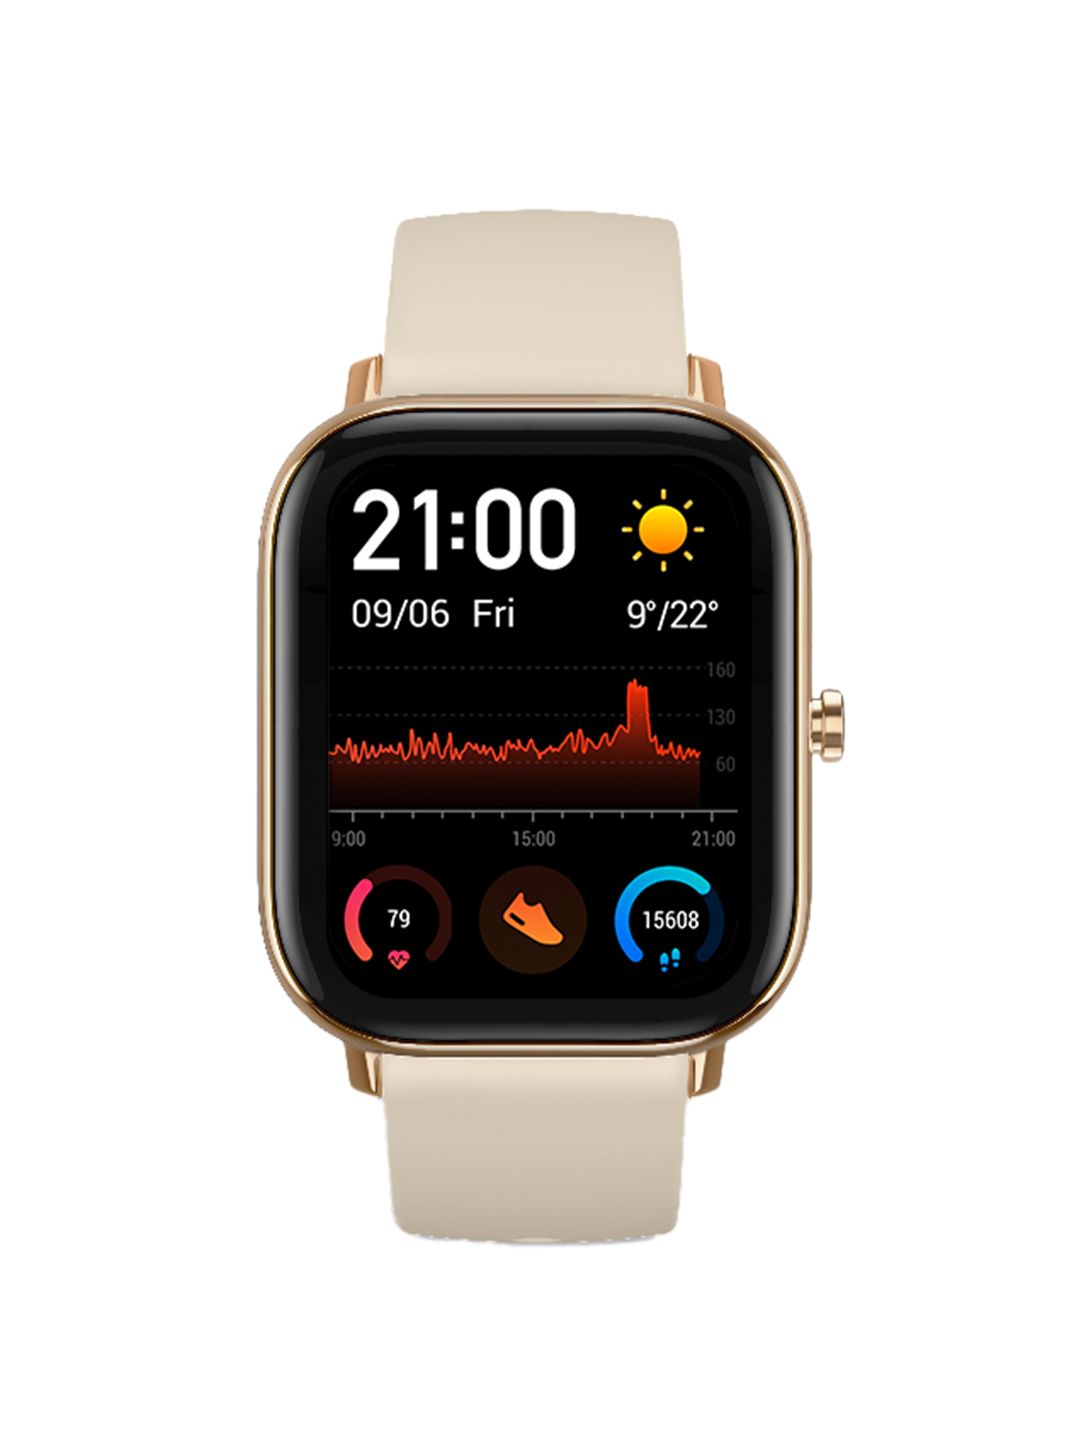 Amazfit Unisex Gold-Toned Huami GTS Smartwatch A1914 Price in India